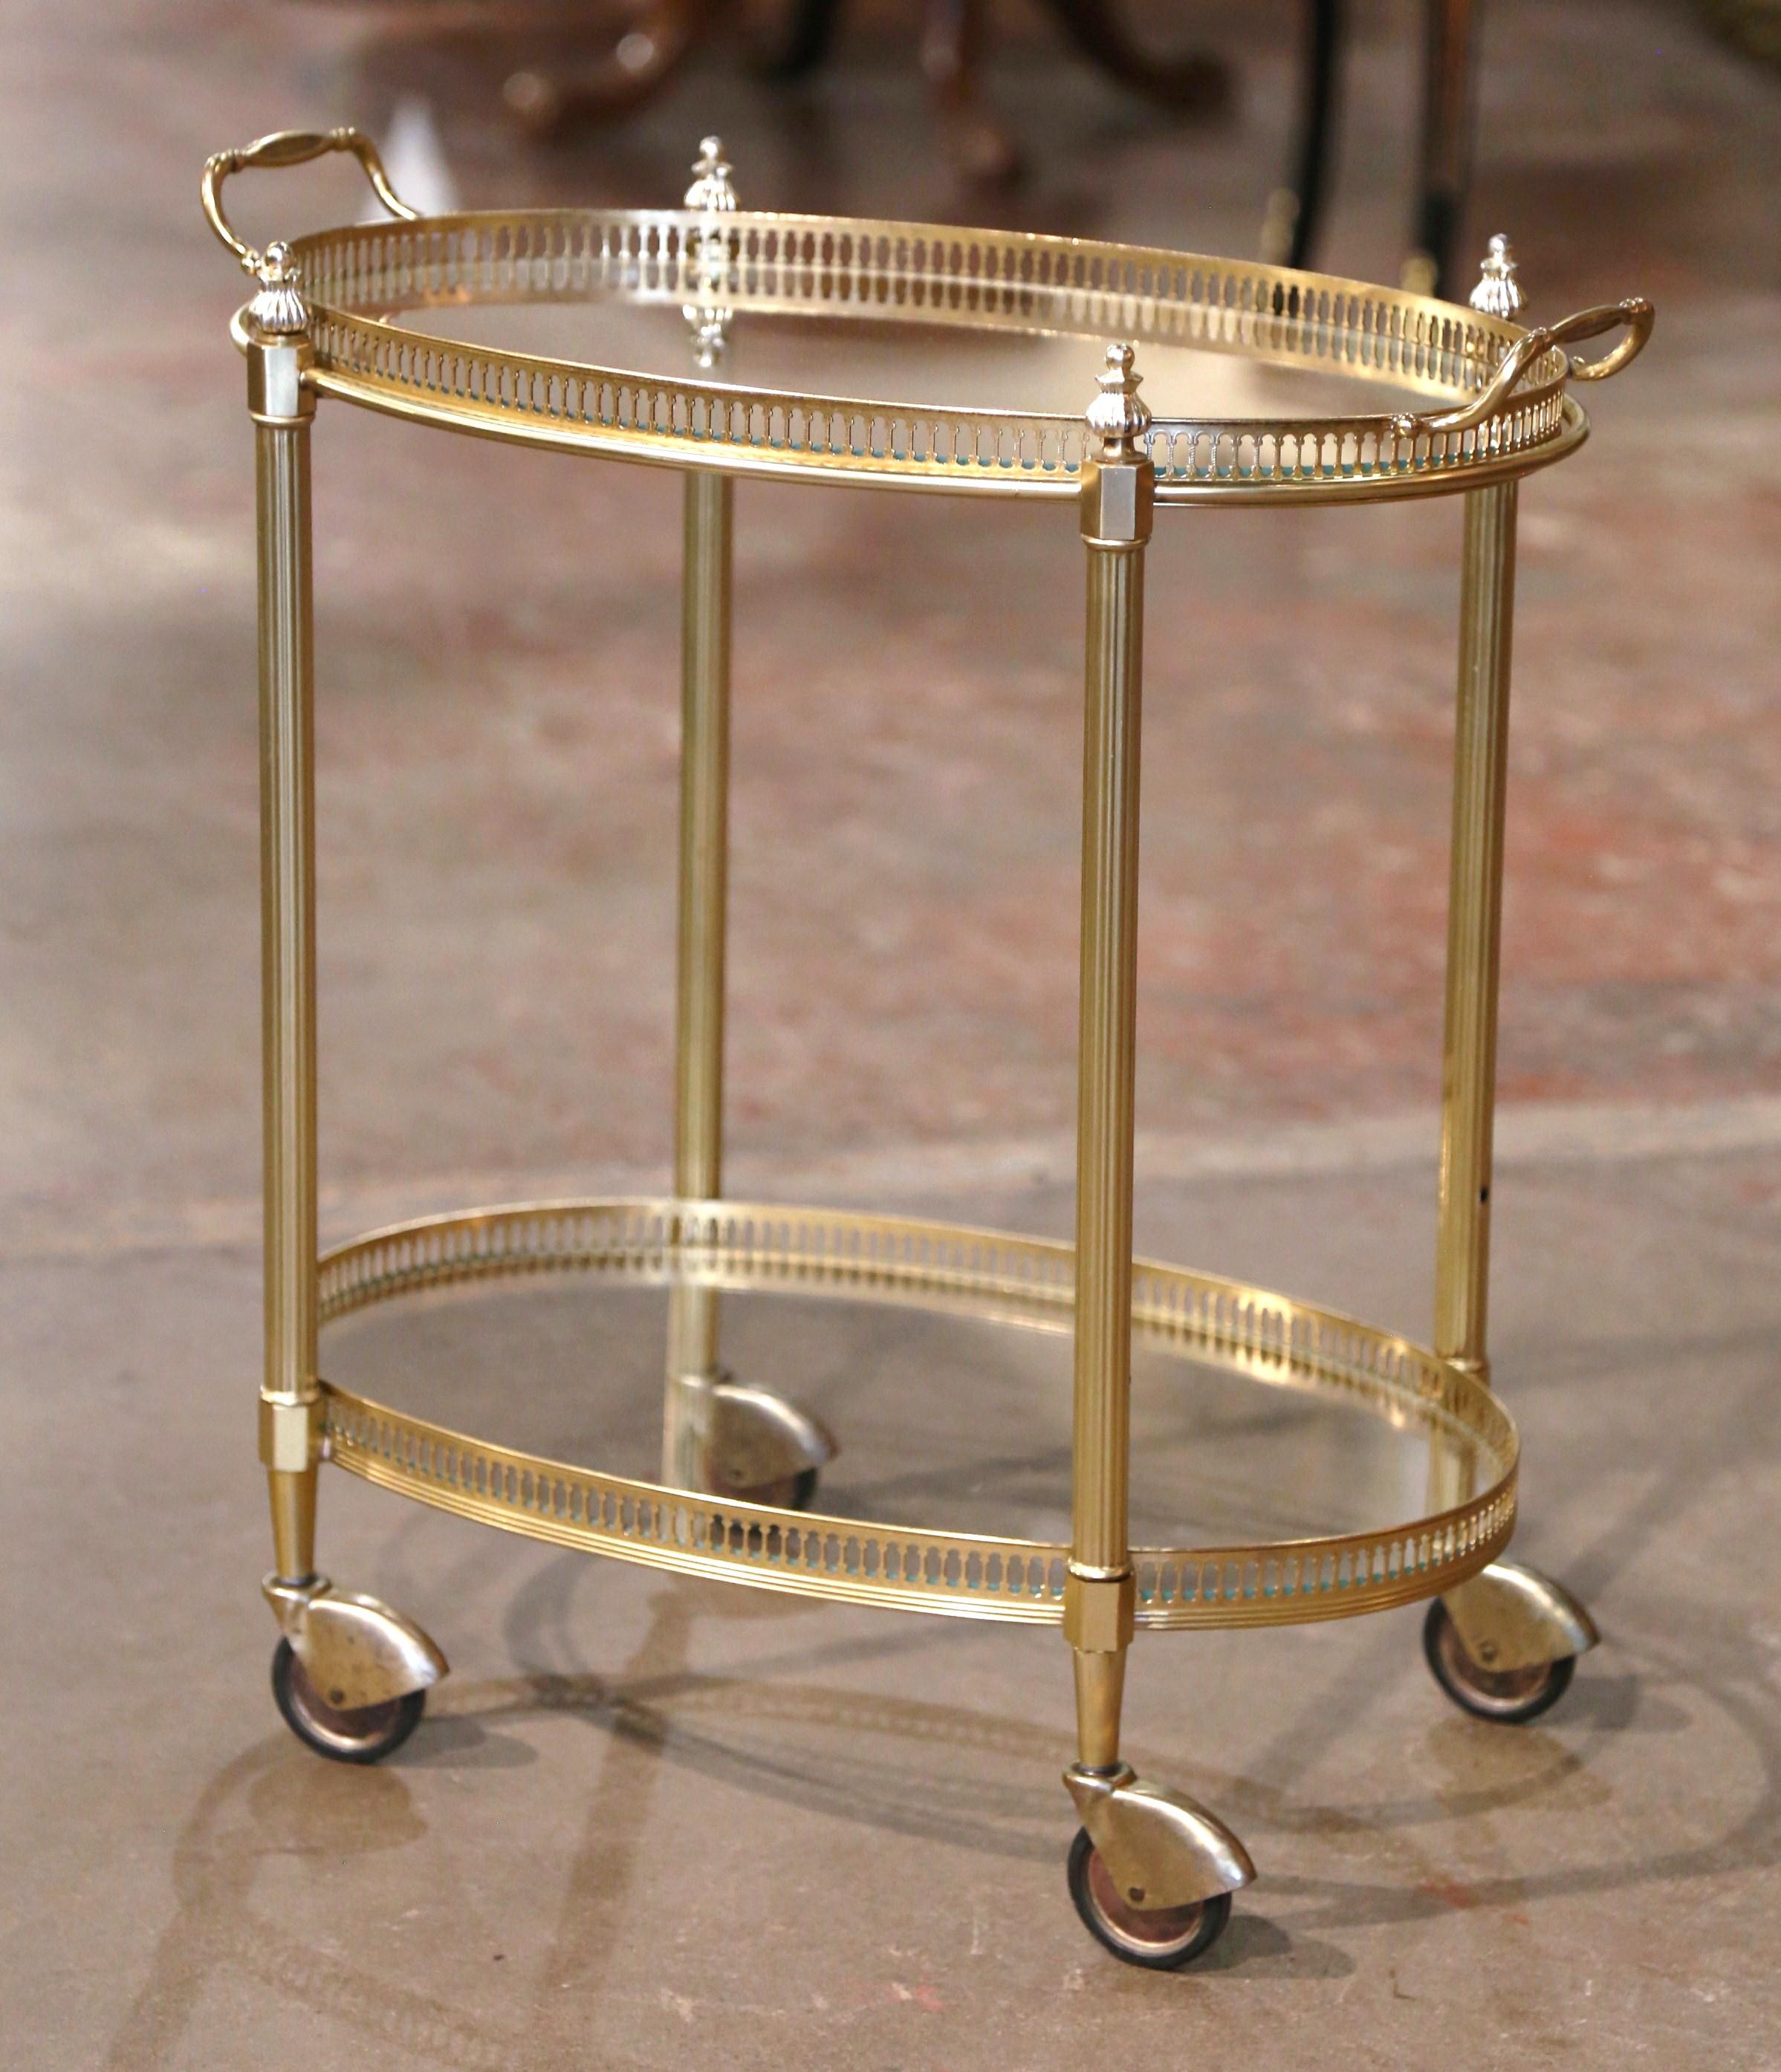 This elegant vintage rolling bar cart was created in France, circa 1960. Built in brass and oval in shape, the two-tier plateau trolley stands fluted legs topped with decorative finials, and ending with small casters at the base. The top deck,